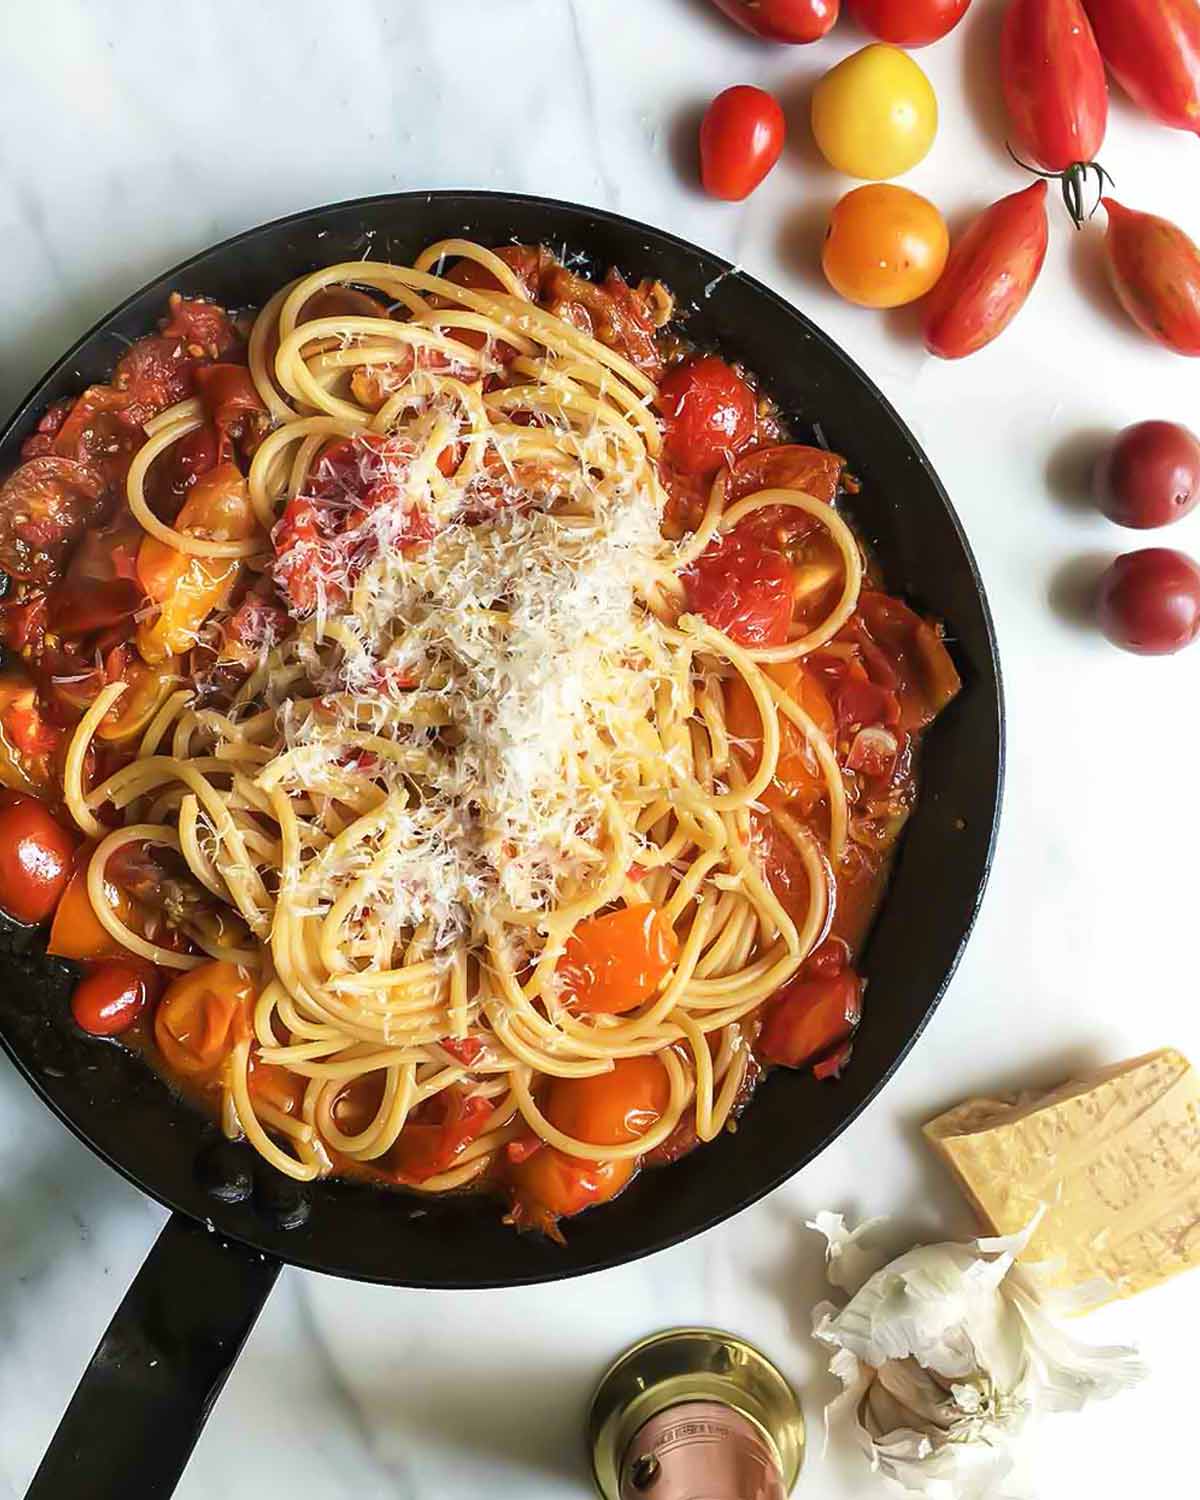 A skillet filled with spaghetti and cherry tomatoes, with Parmesan, garlic, and tomatoes scattered around it.